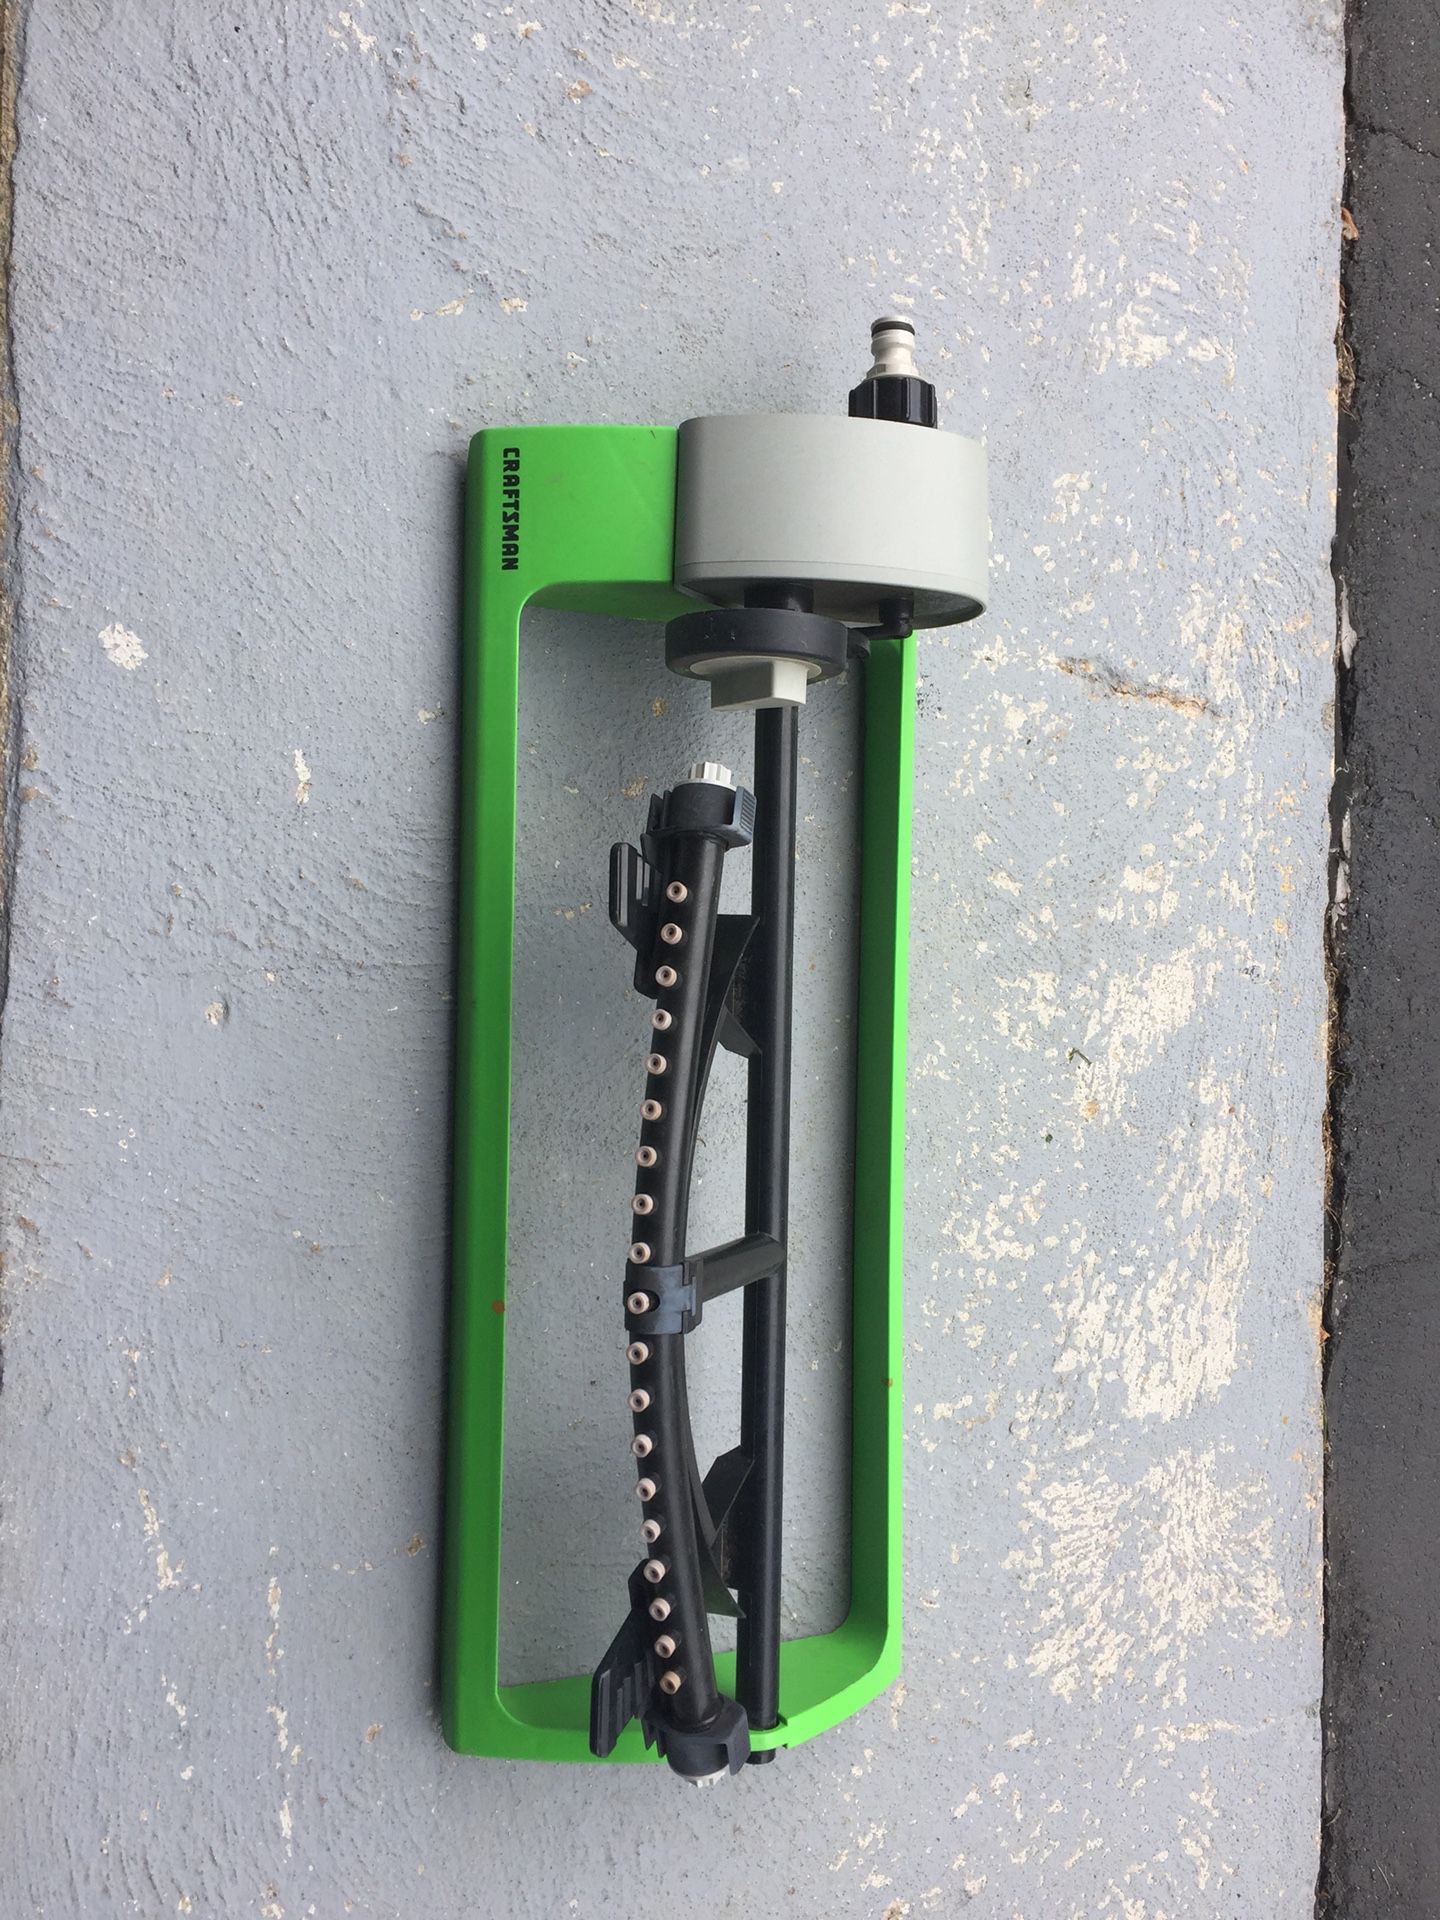 Ossilating lawn water sprinkler in very good / excellent condition